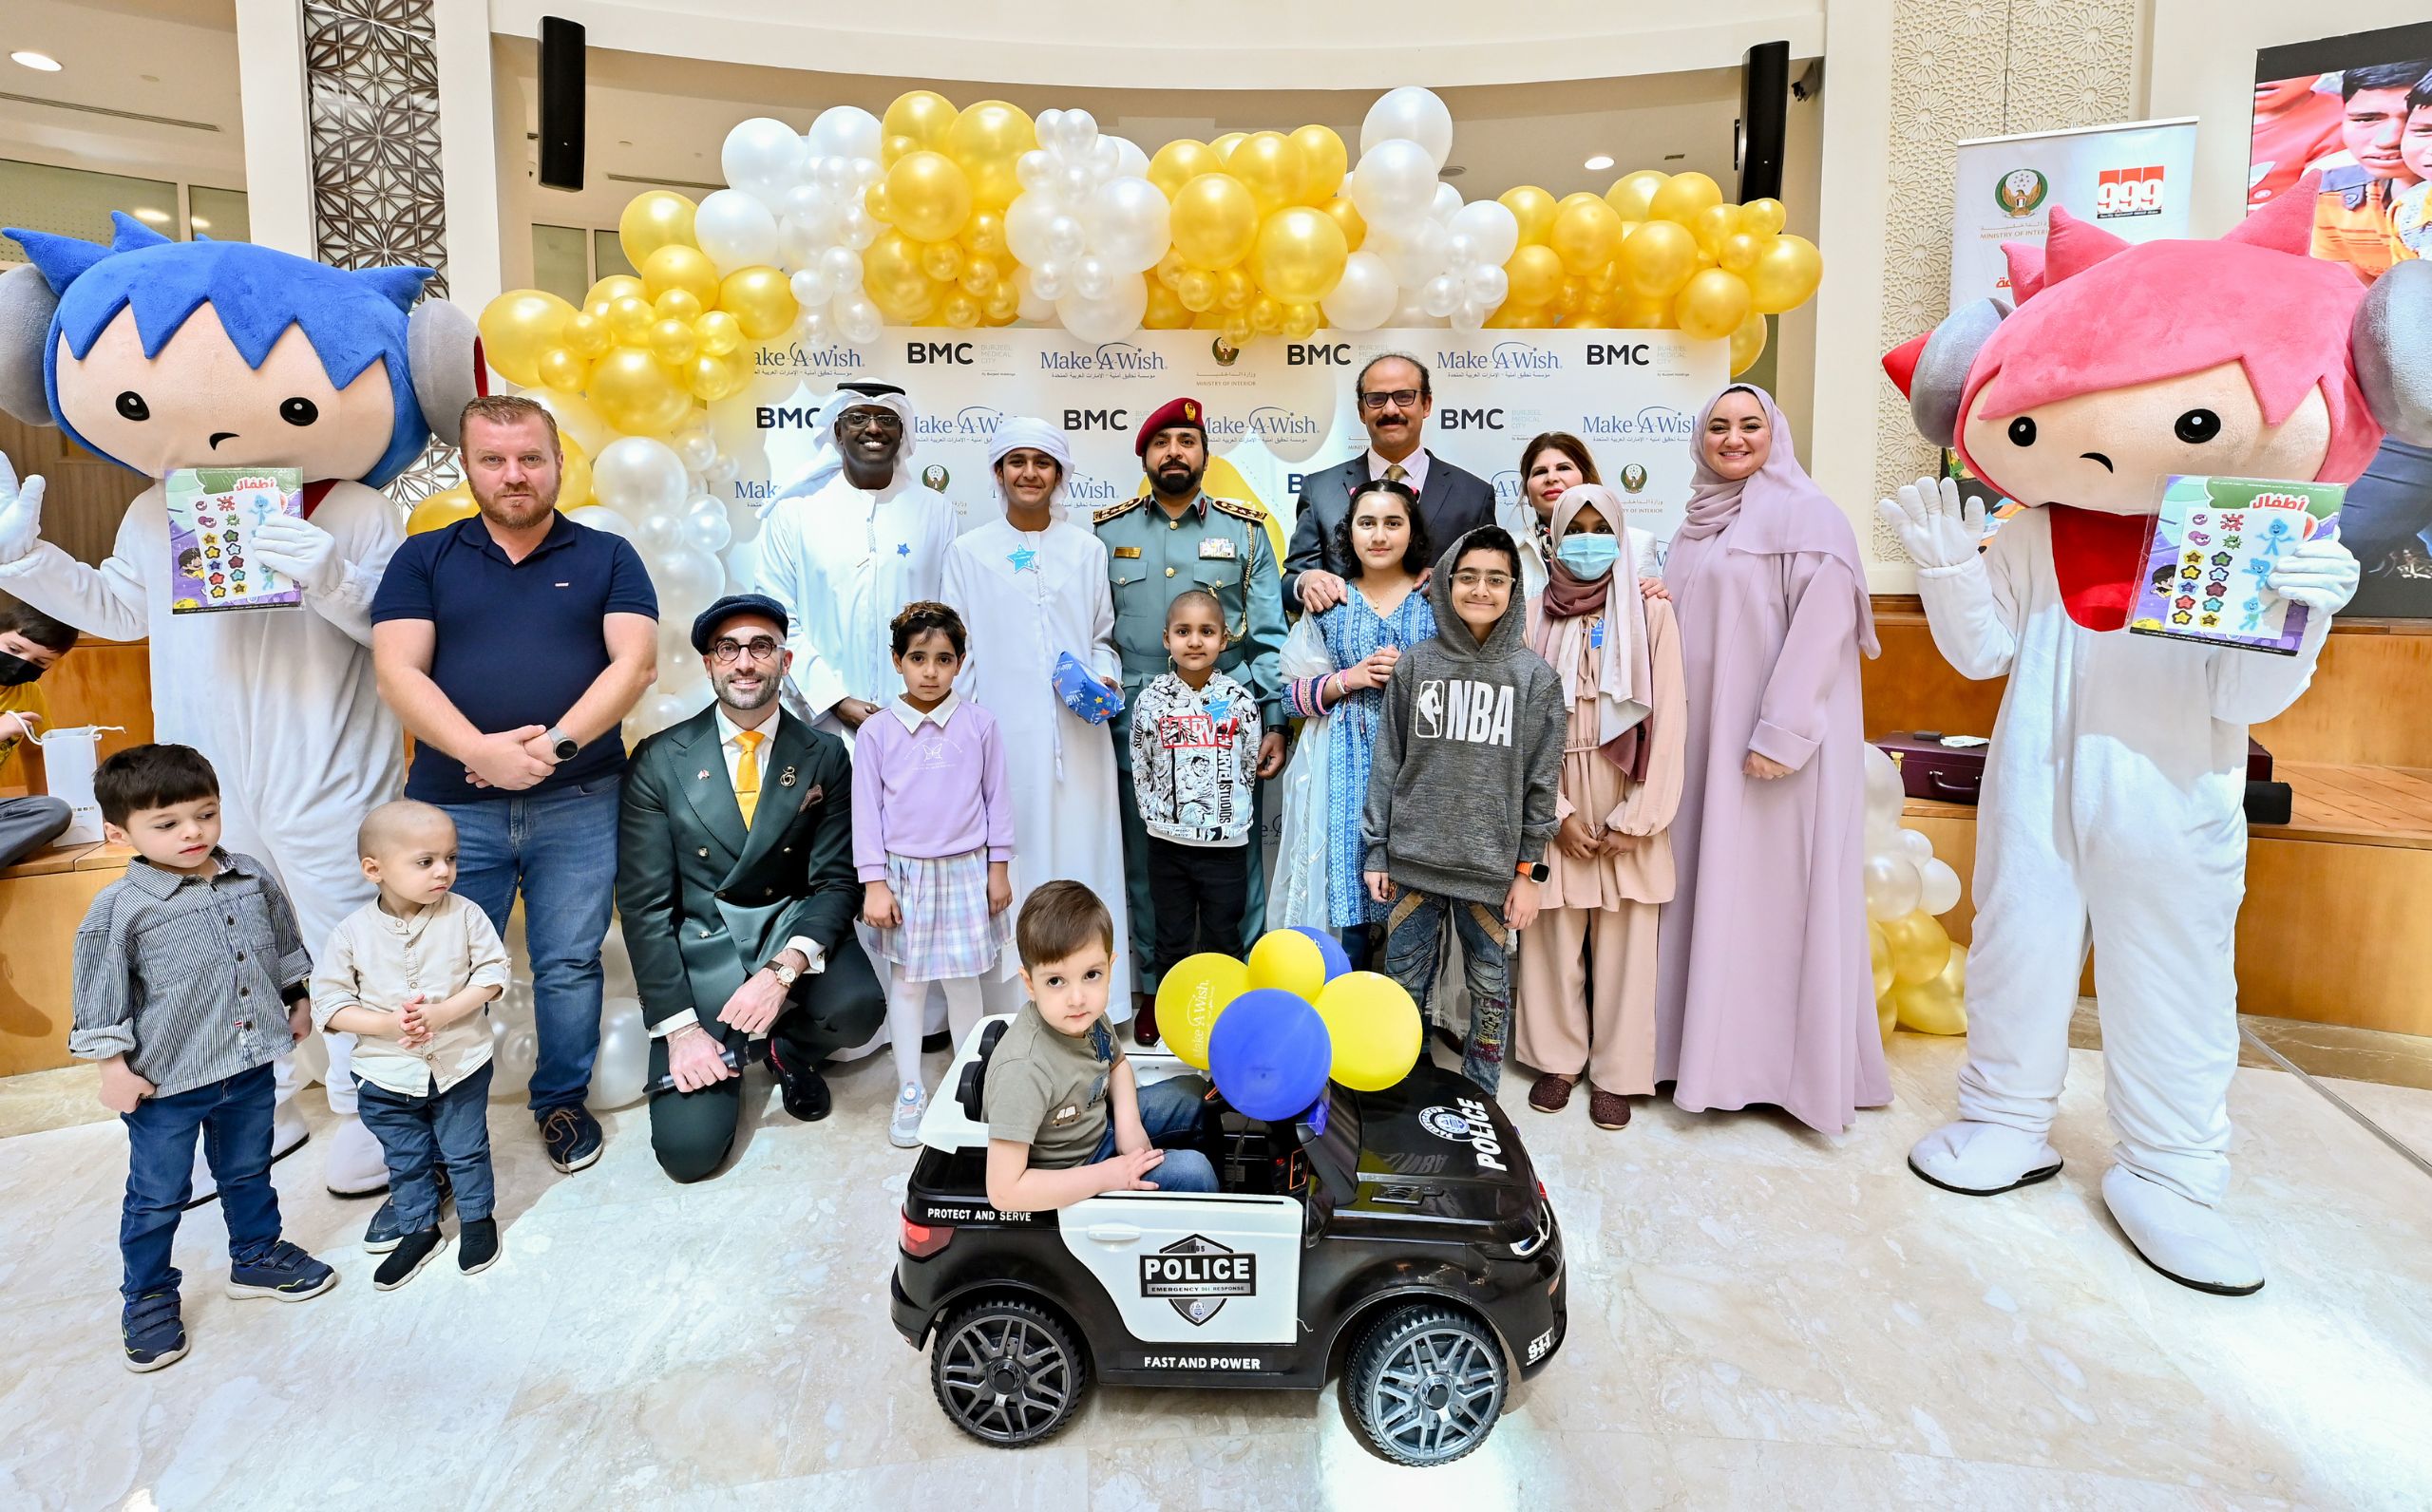 “Make A Wish” in collaboration with the “Ministry of Interior” and “Burjeel” grant wishes for children on International Childhood Cancer Day